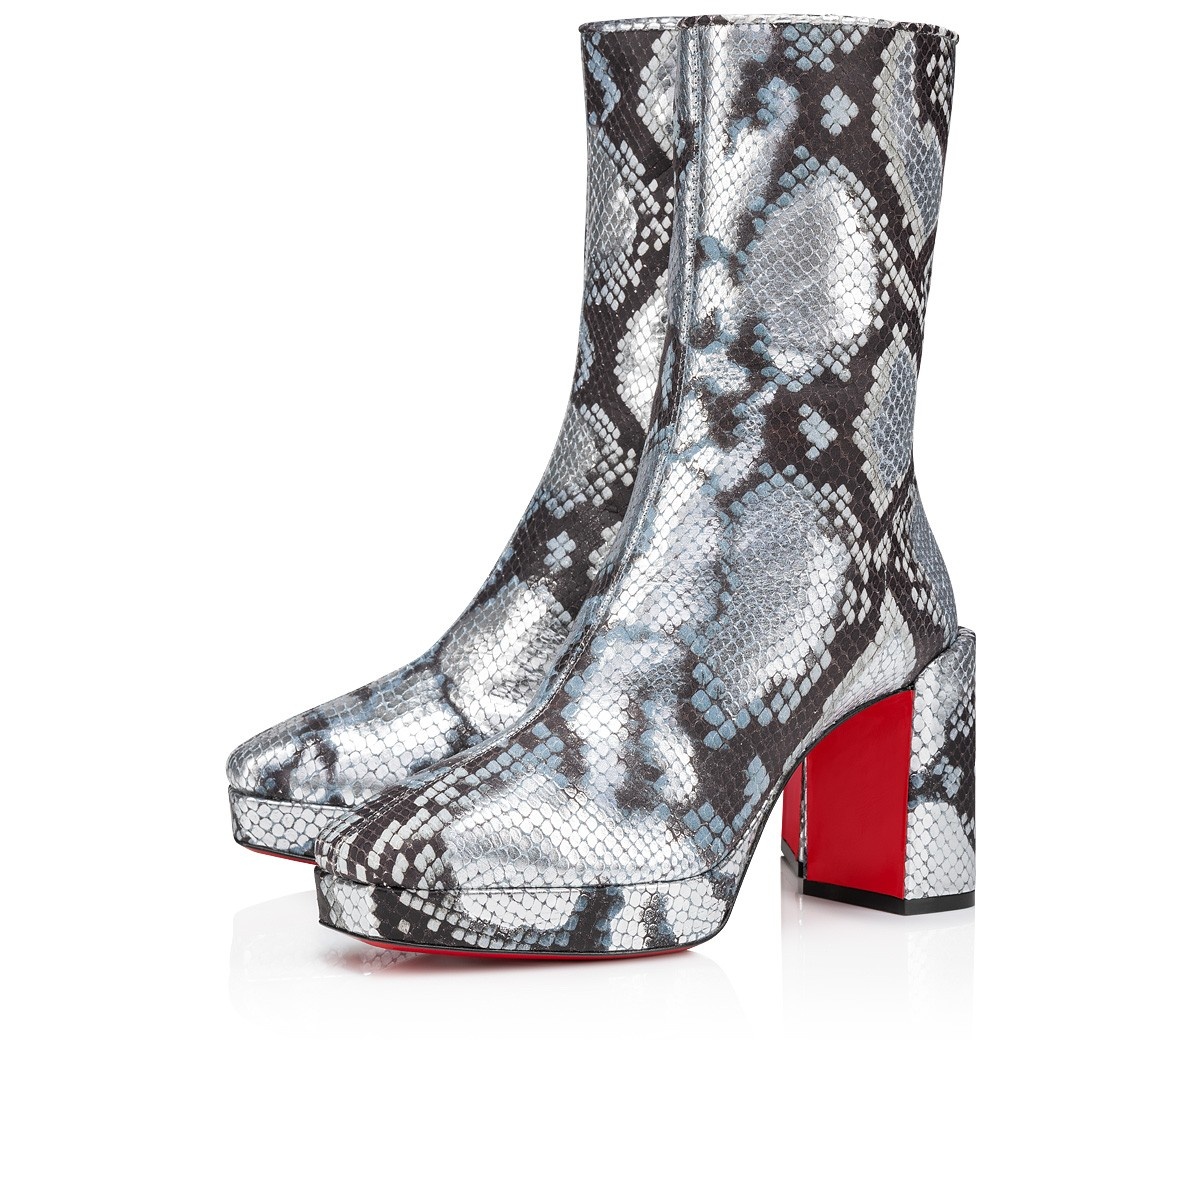 Janetta - Low Boots - Calf Leather - Black - Christian Louboutin